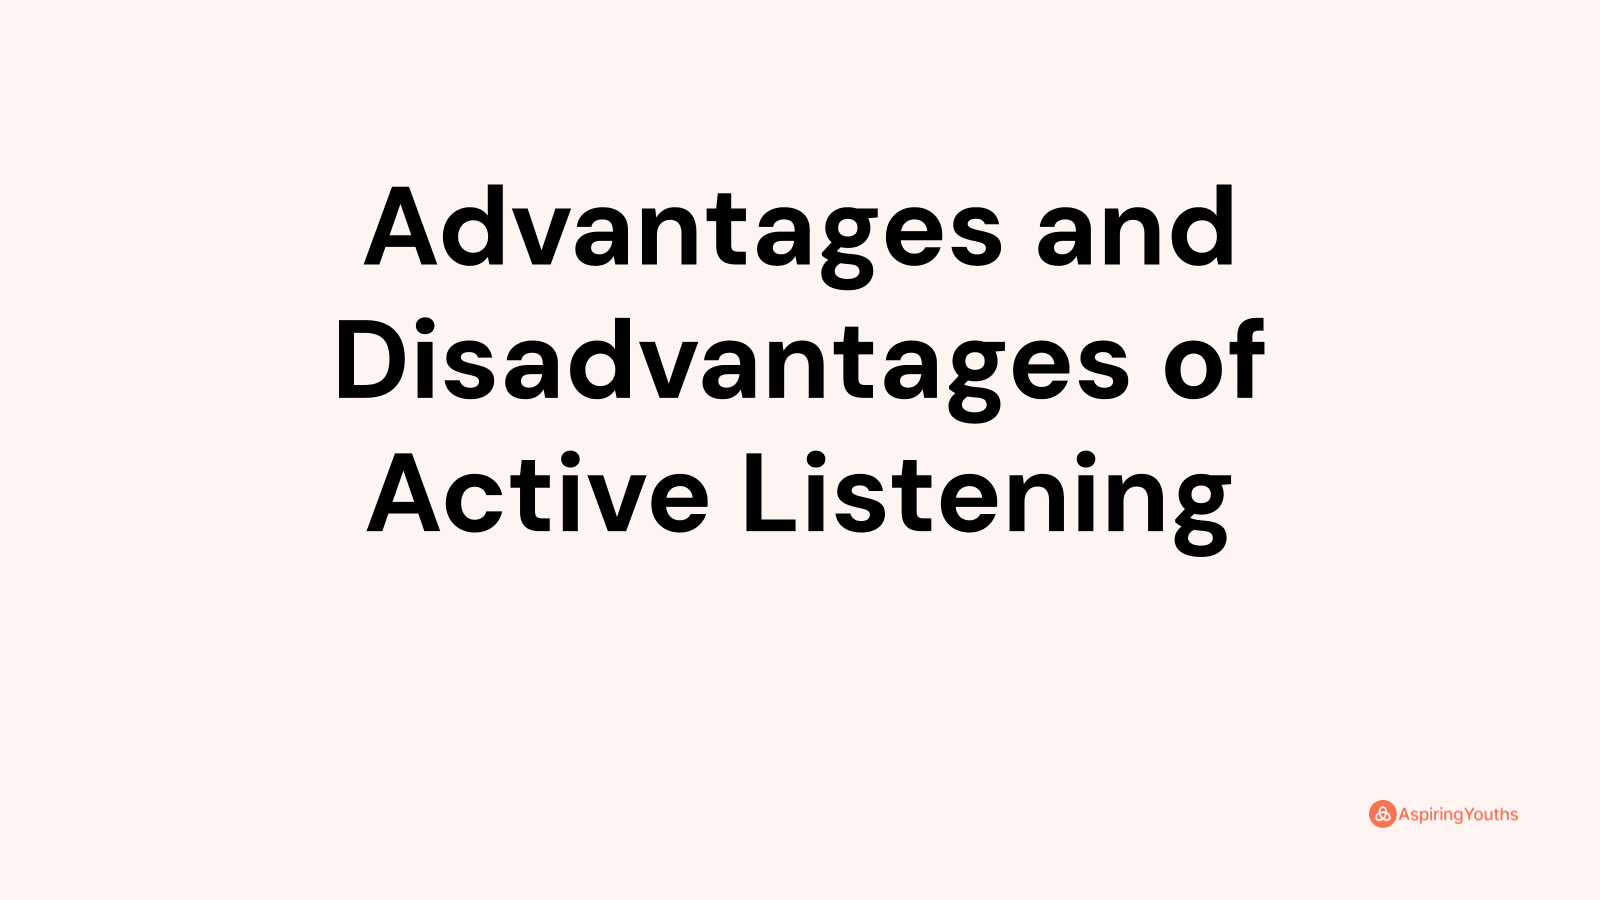 Advantages and disadvantages of Active Listening